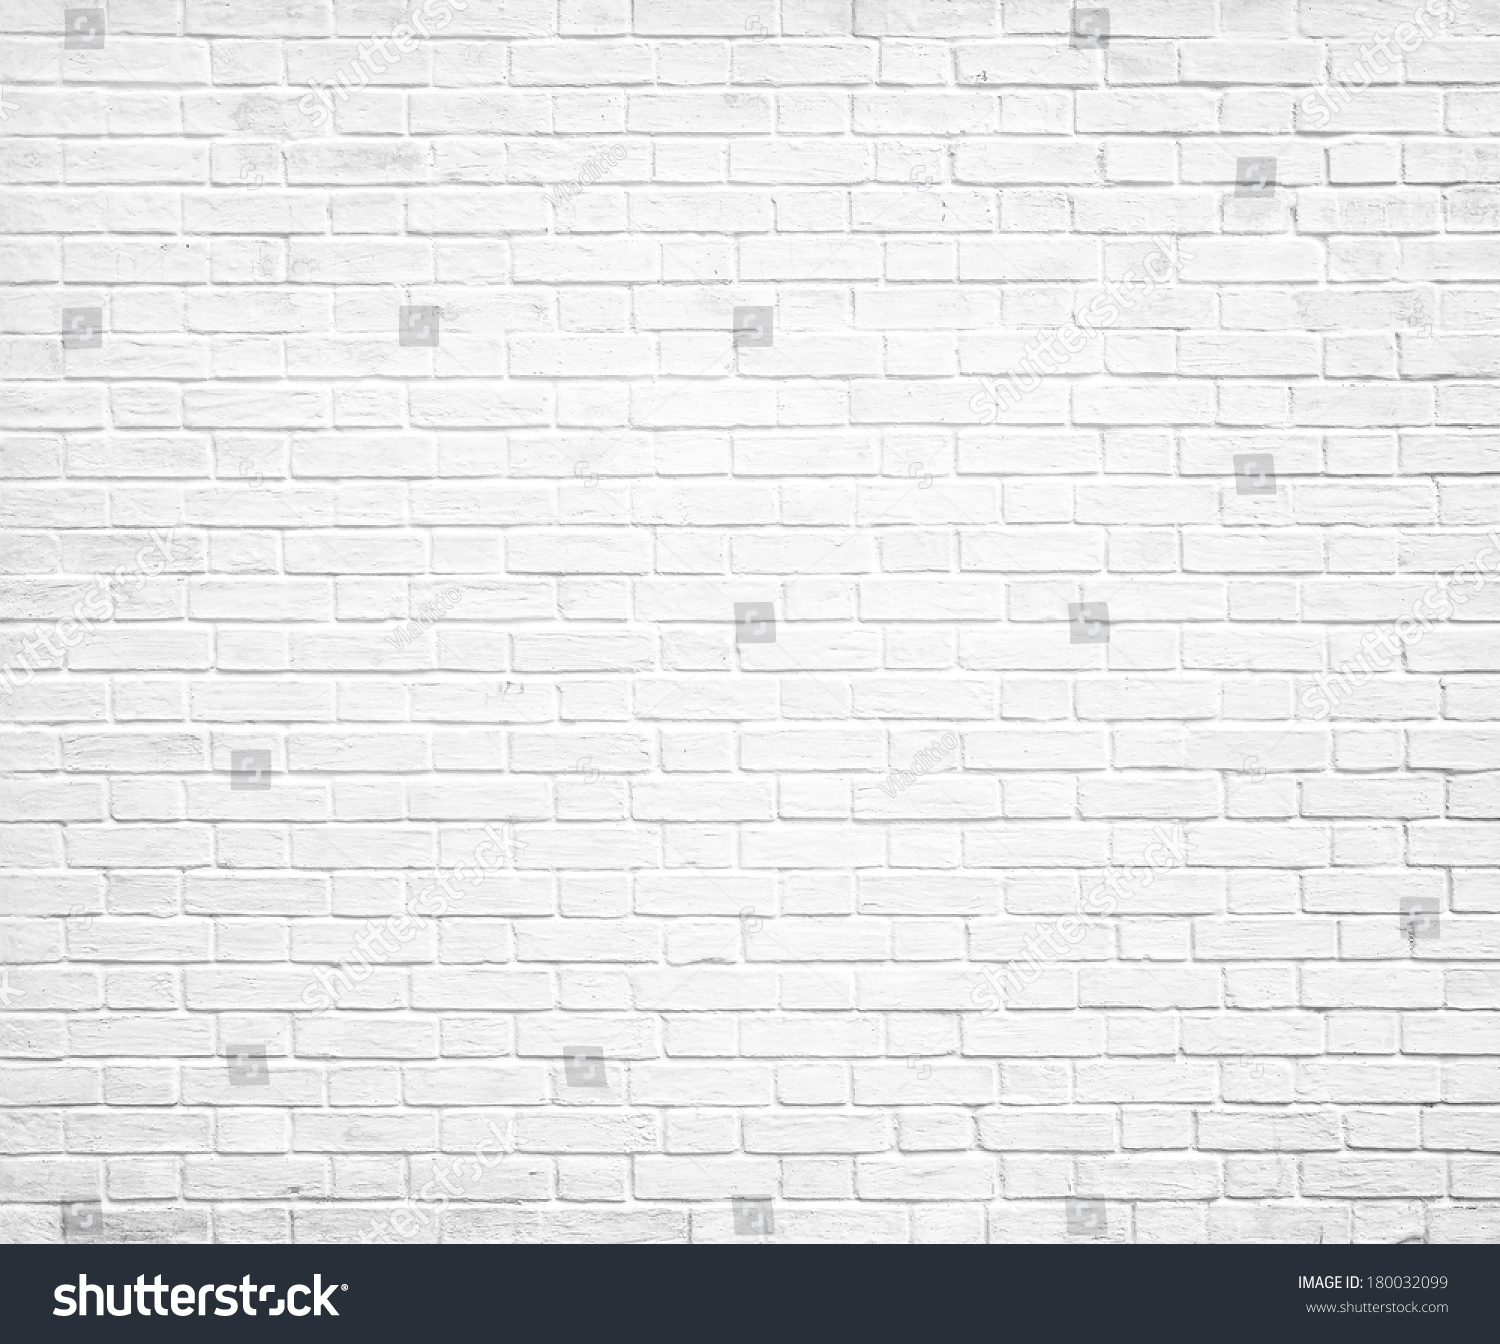 Abstract weathered texture stained old stucco light gray and aged paint white brick wall background in rural room, grungy rusty blocks of stonework technology color horizontal architecture wallpaper #180032099